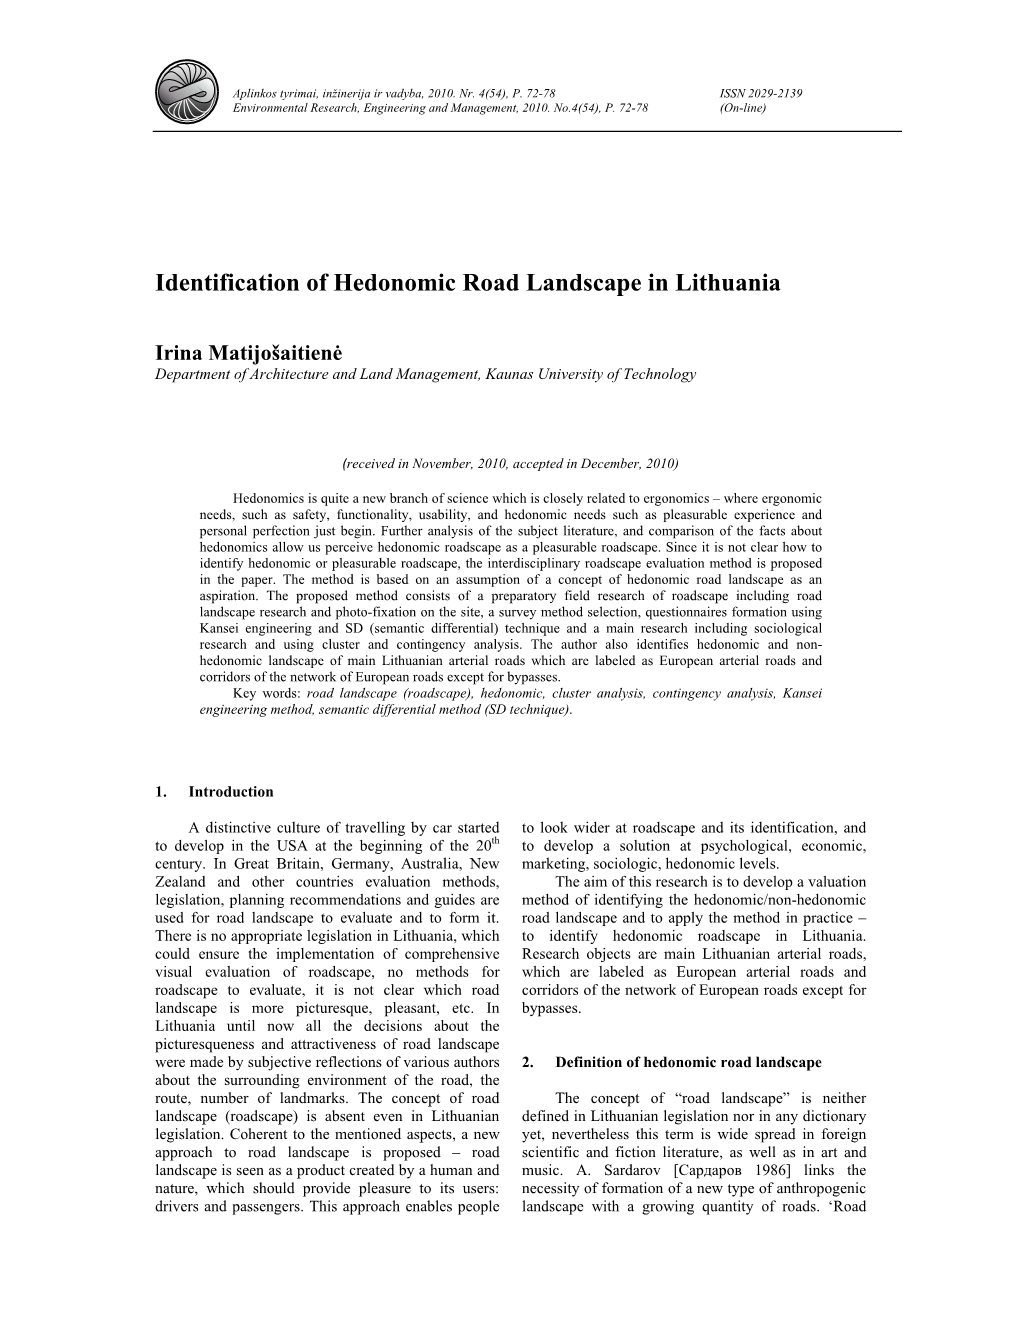 Identification of Hedonomic Road Landscape in Lithuania